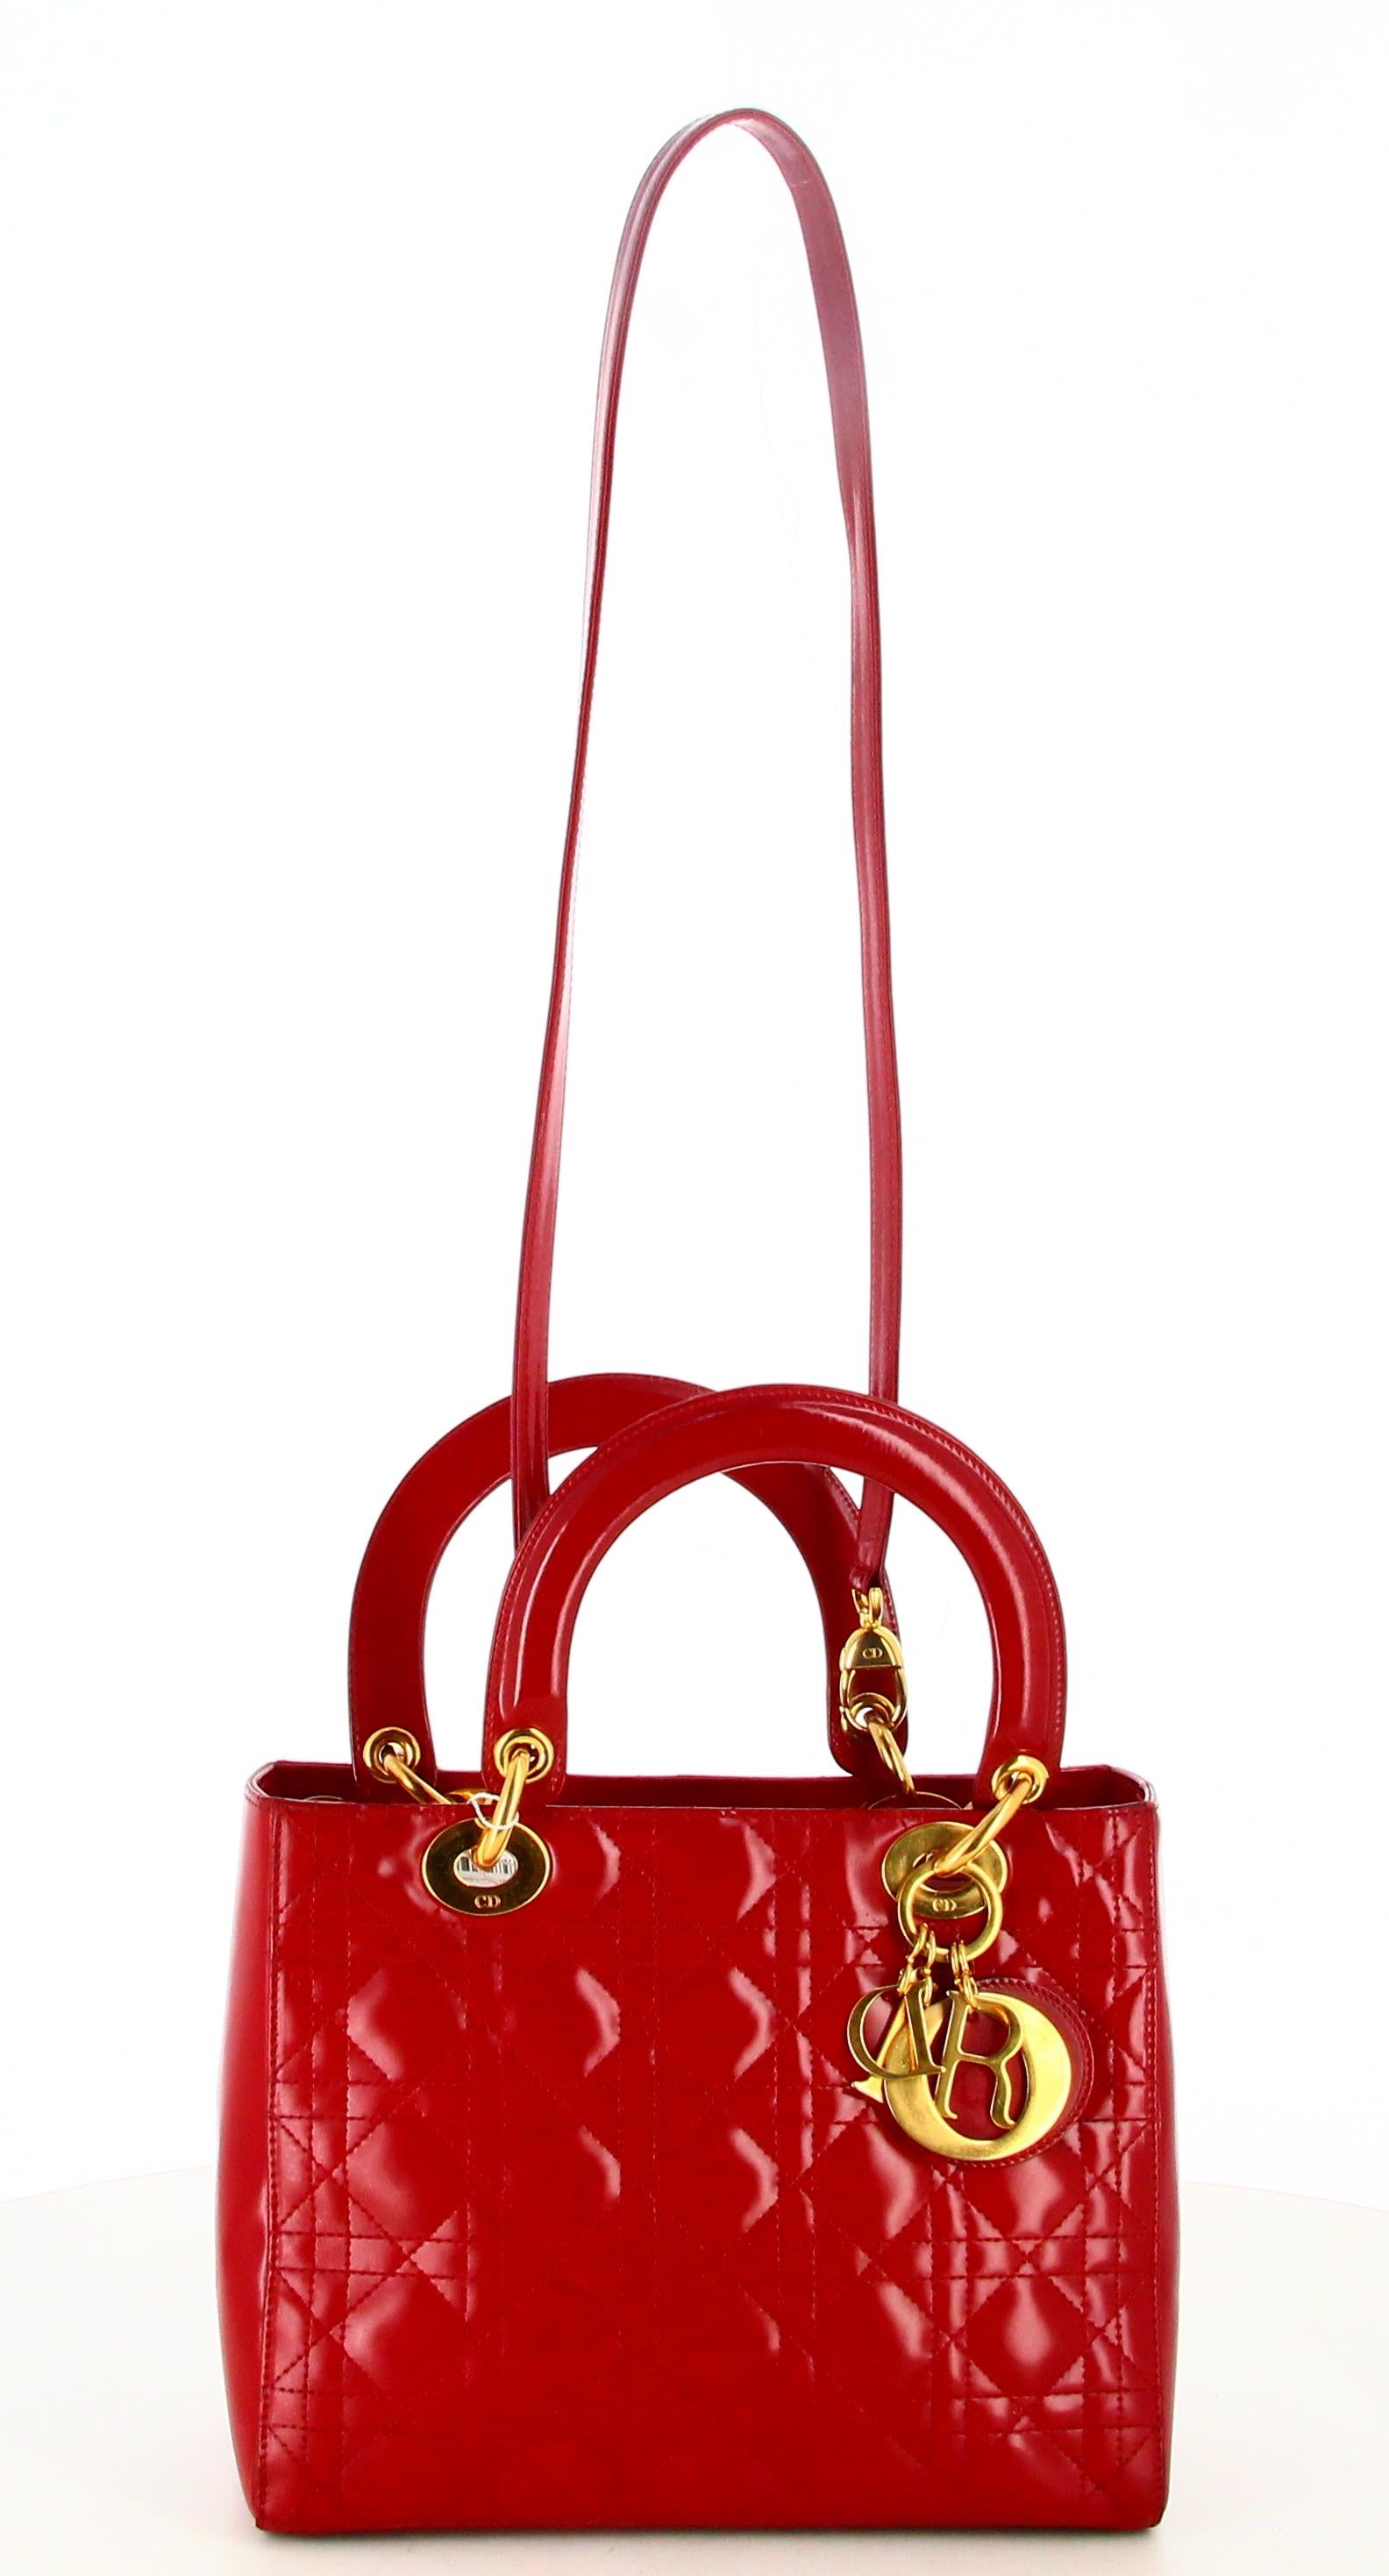 Lady Dior Medium Cannage Handbag

- Very good condition. Slight traces of wear over time.
- Lady Dior handbag 
- Red quilted leather
- Two handles plus one shoulder strap in red leather
- Clasp: golden zip 
- Black lining plus inside pocket